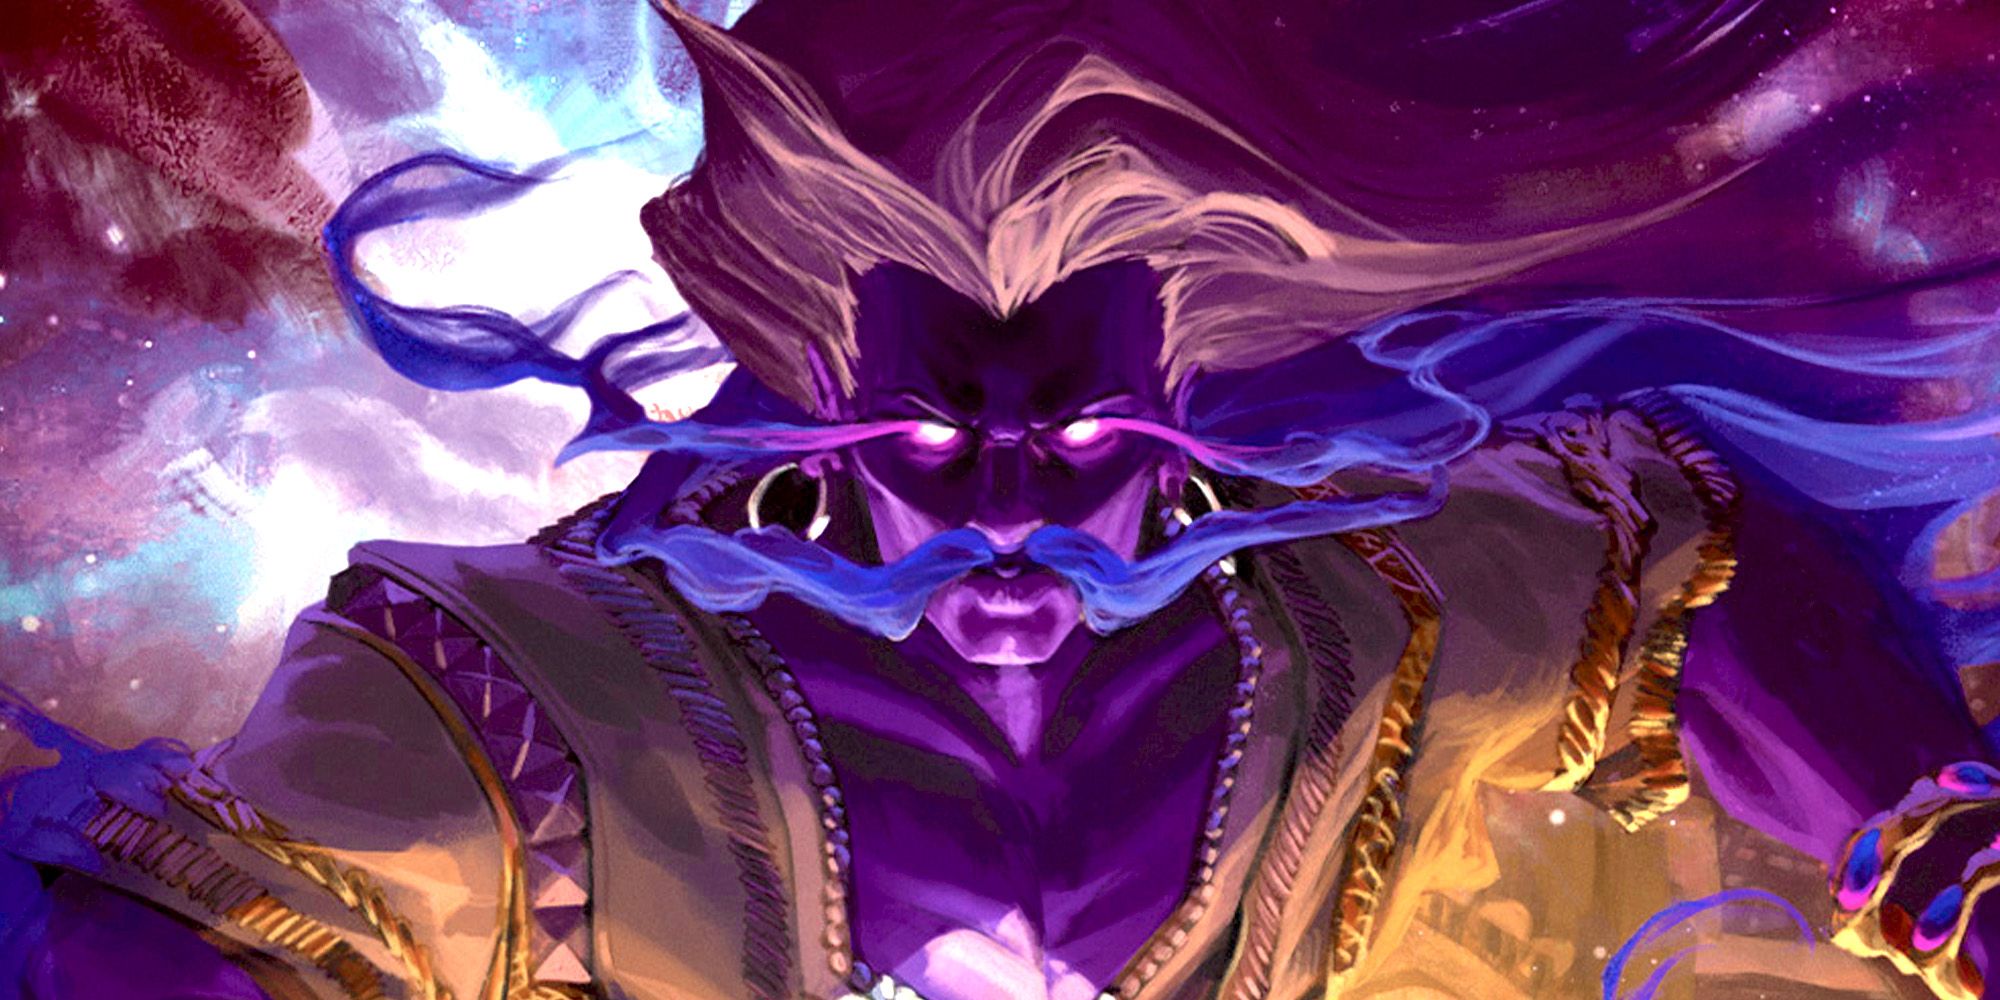 DnD Quests from the Infinite Staircase cover image showing a cosmic being.